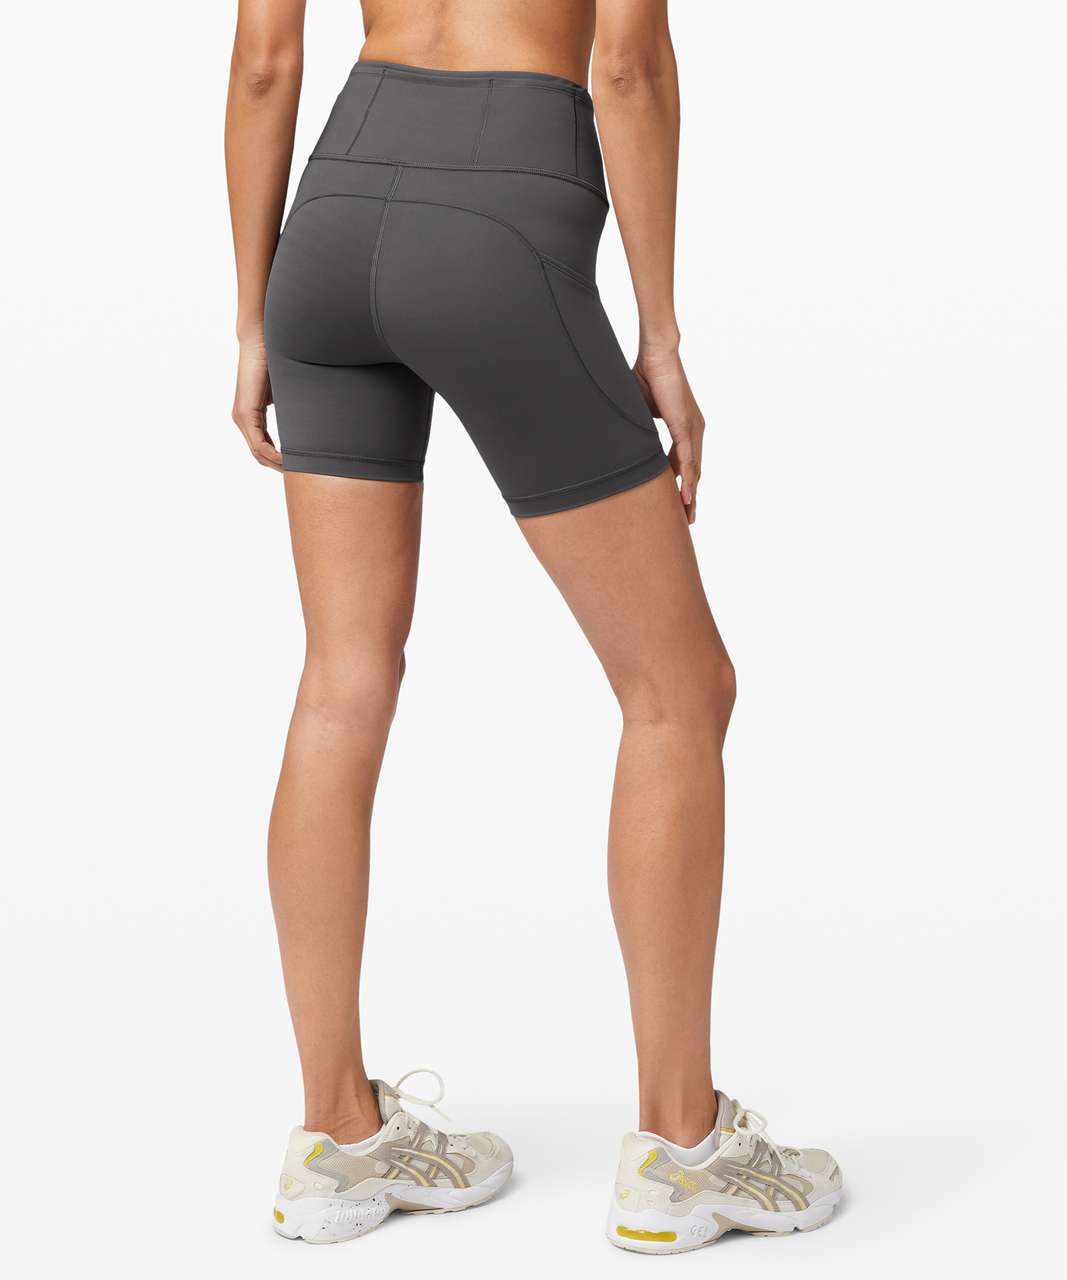 Lululemon Fast and Free Short 6" *Non-Reflective - Graphite Grey